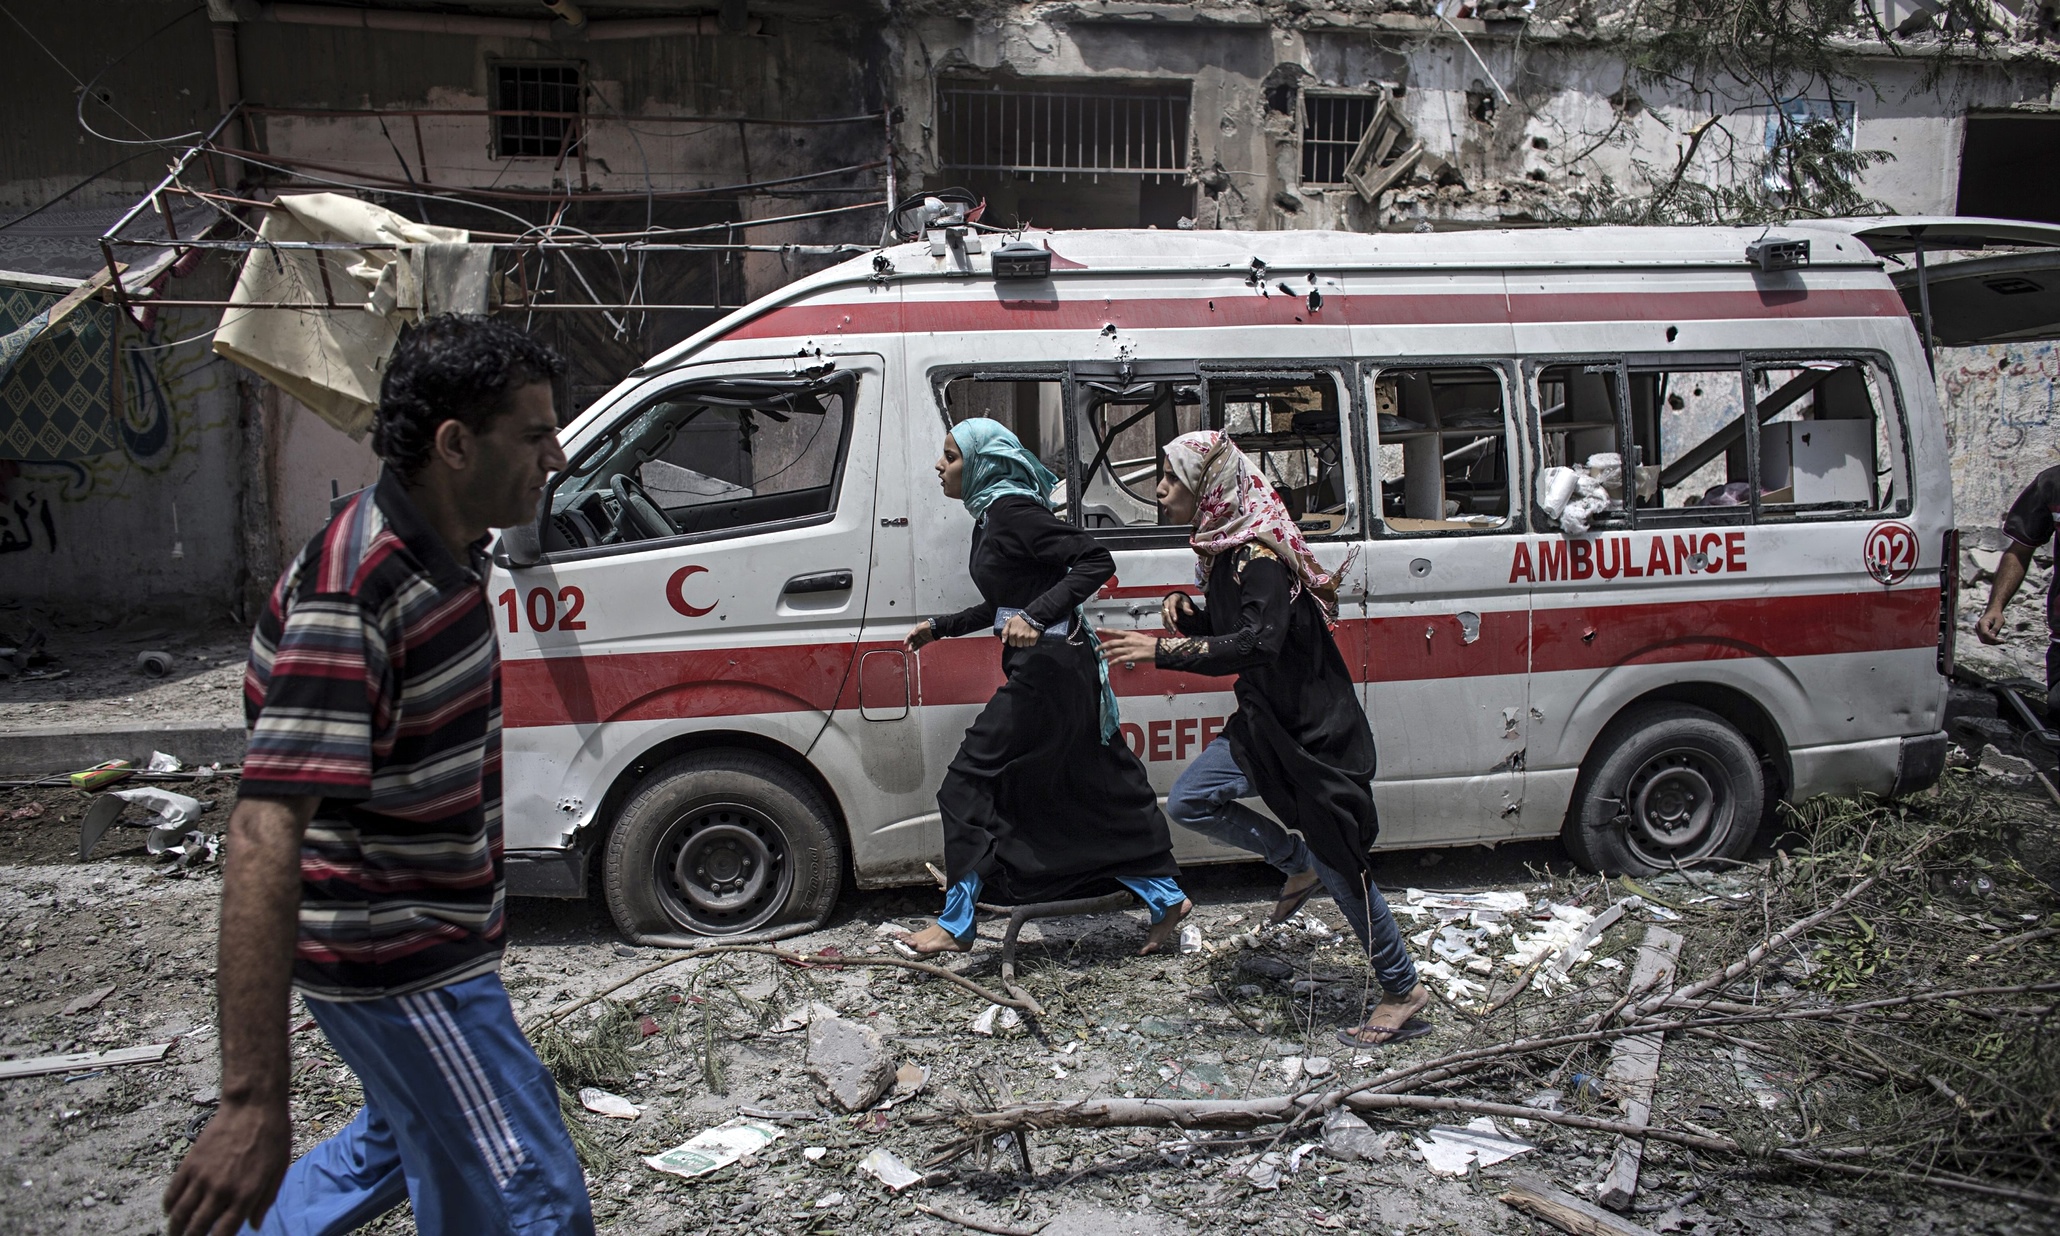 The 2014 conflict left Gaza’s healthcare shattered. When will justice